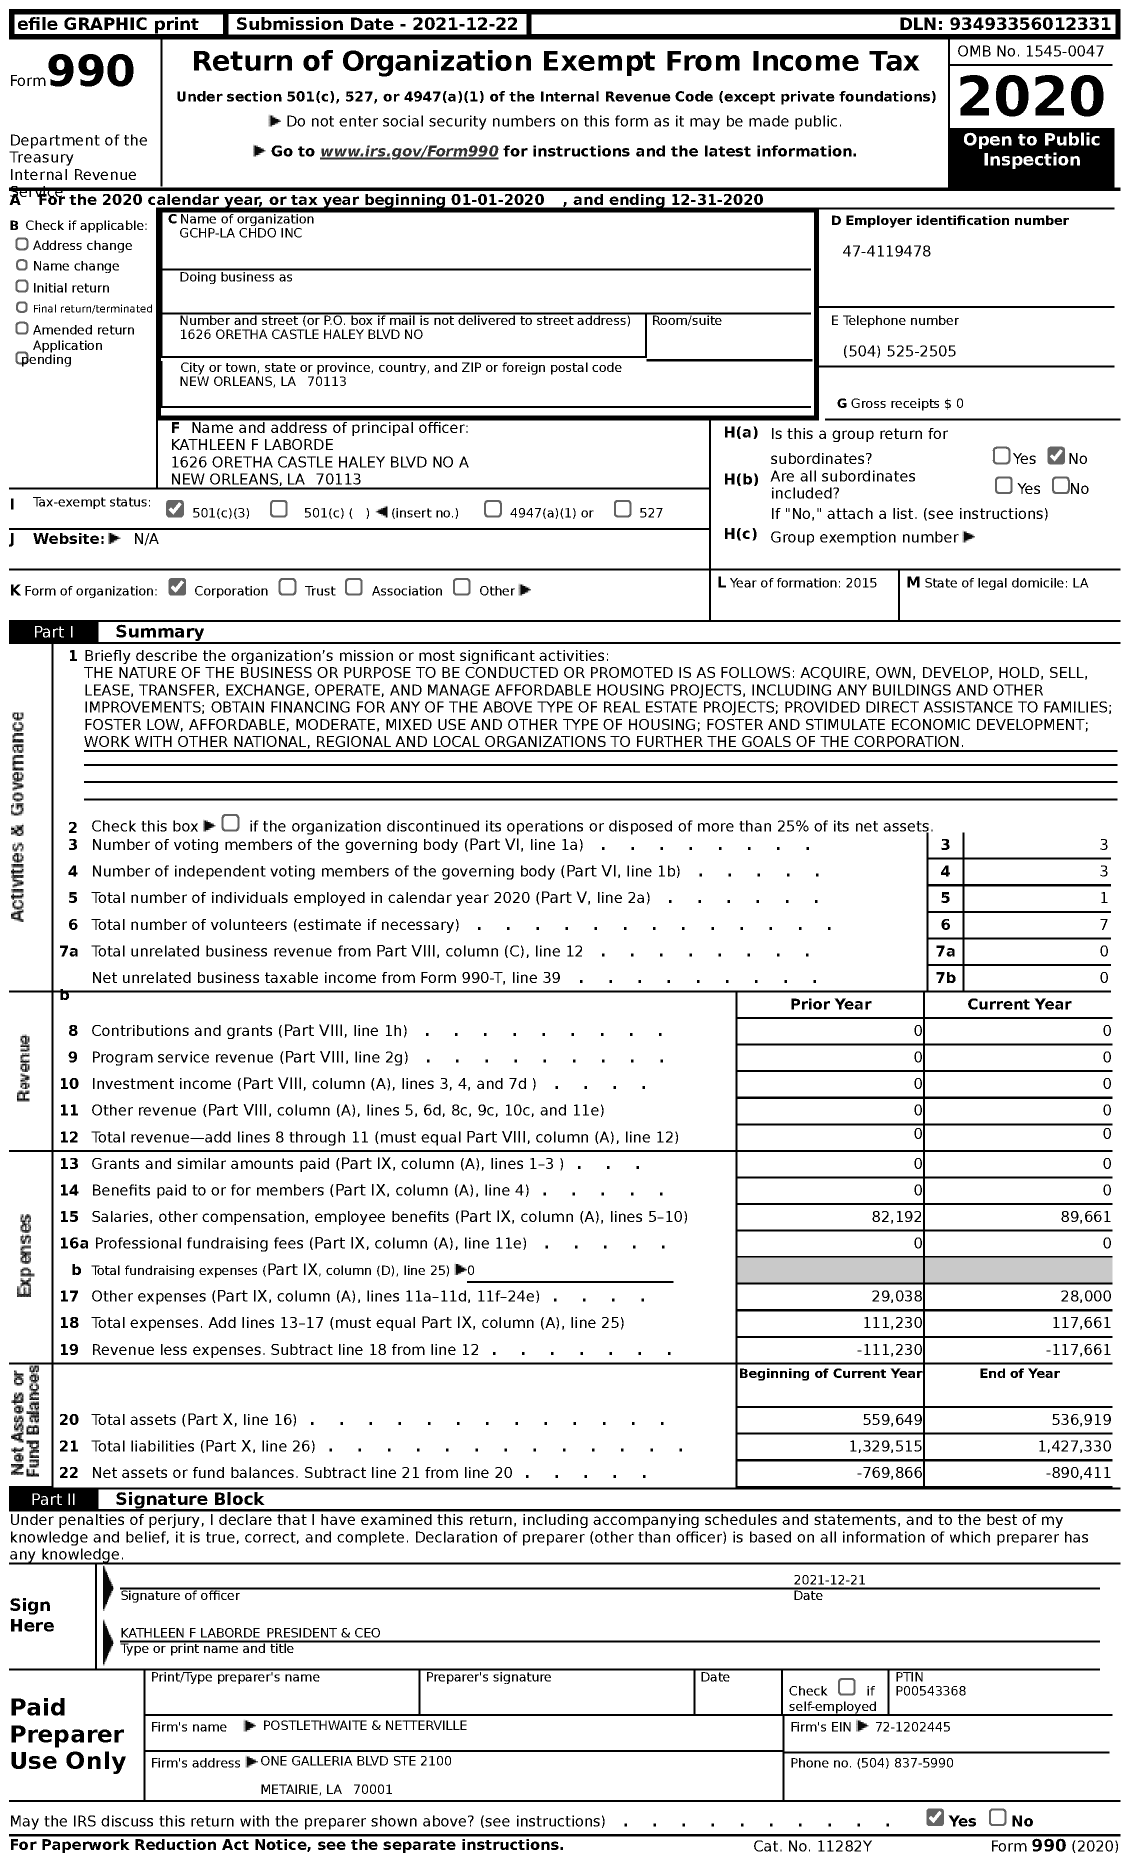 Image of first page of 2020 Form 990 for Gchp-La Chdo